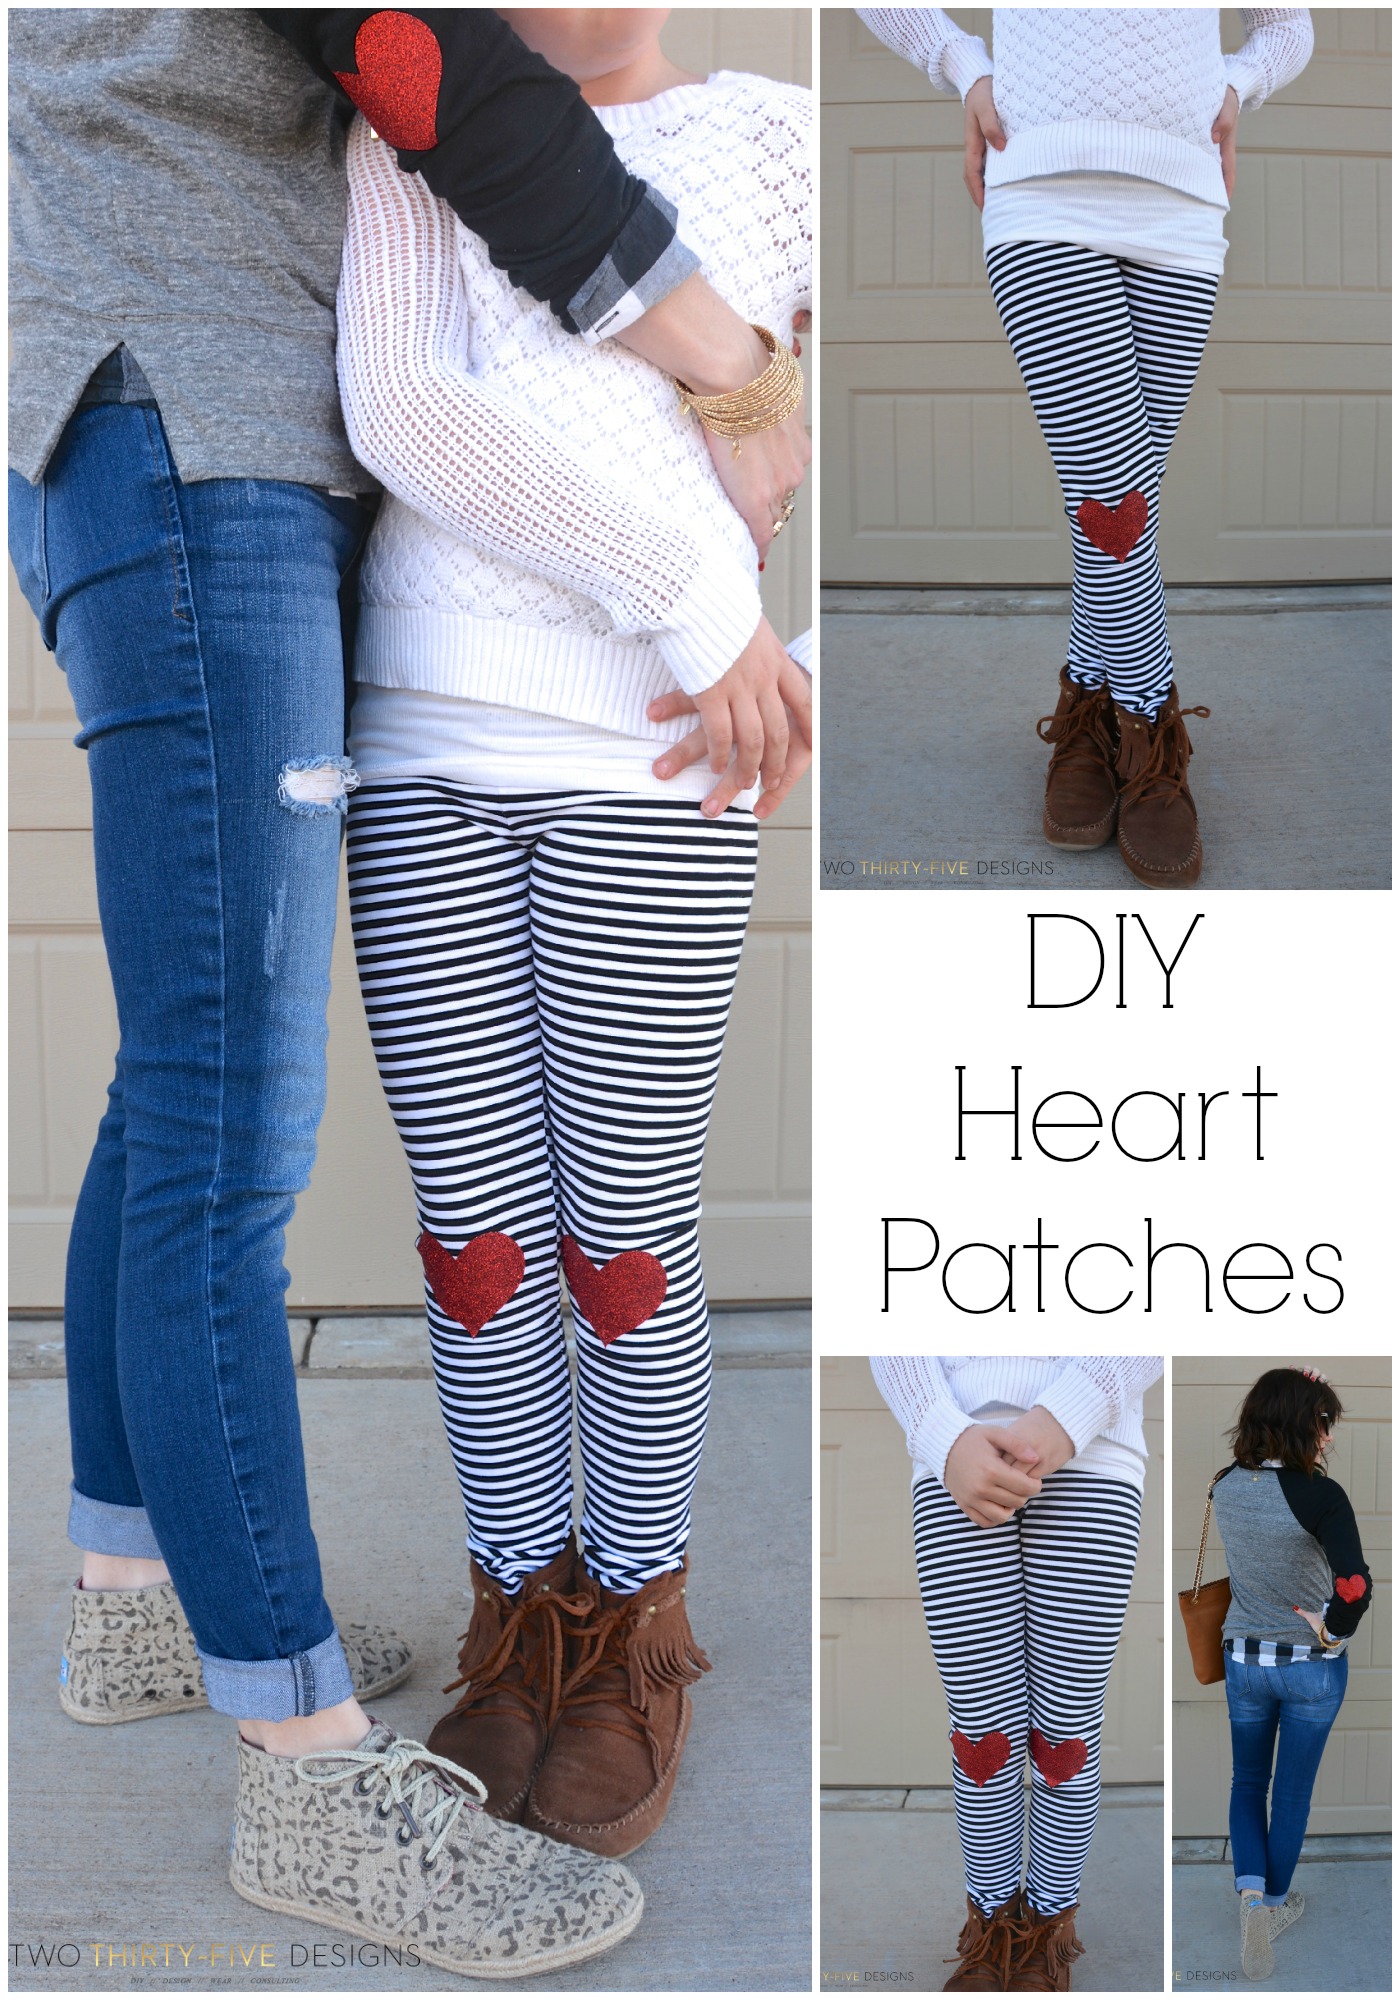 20+ DIY Creative and Fun Knee Patches on Pants